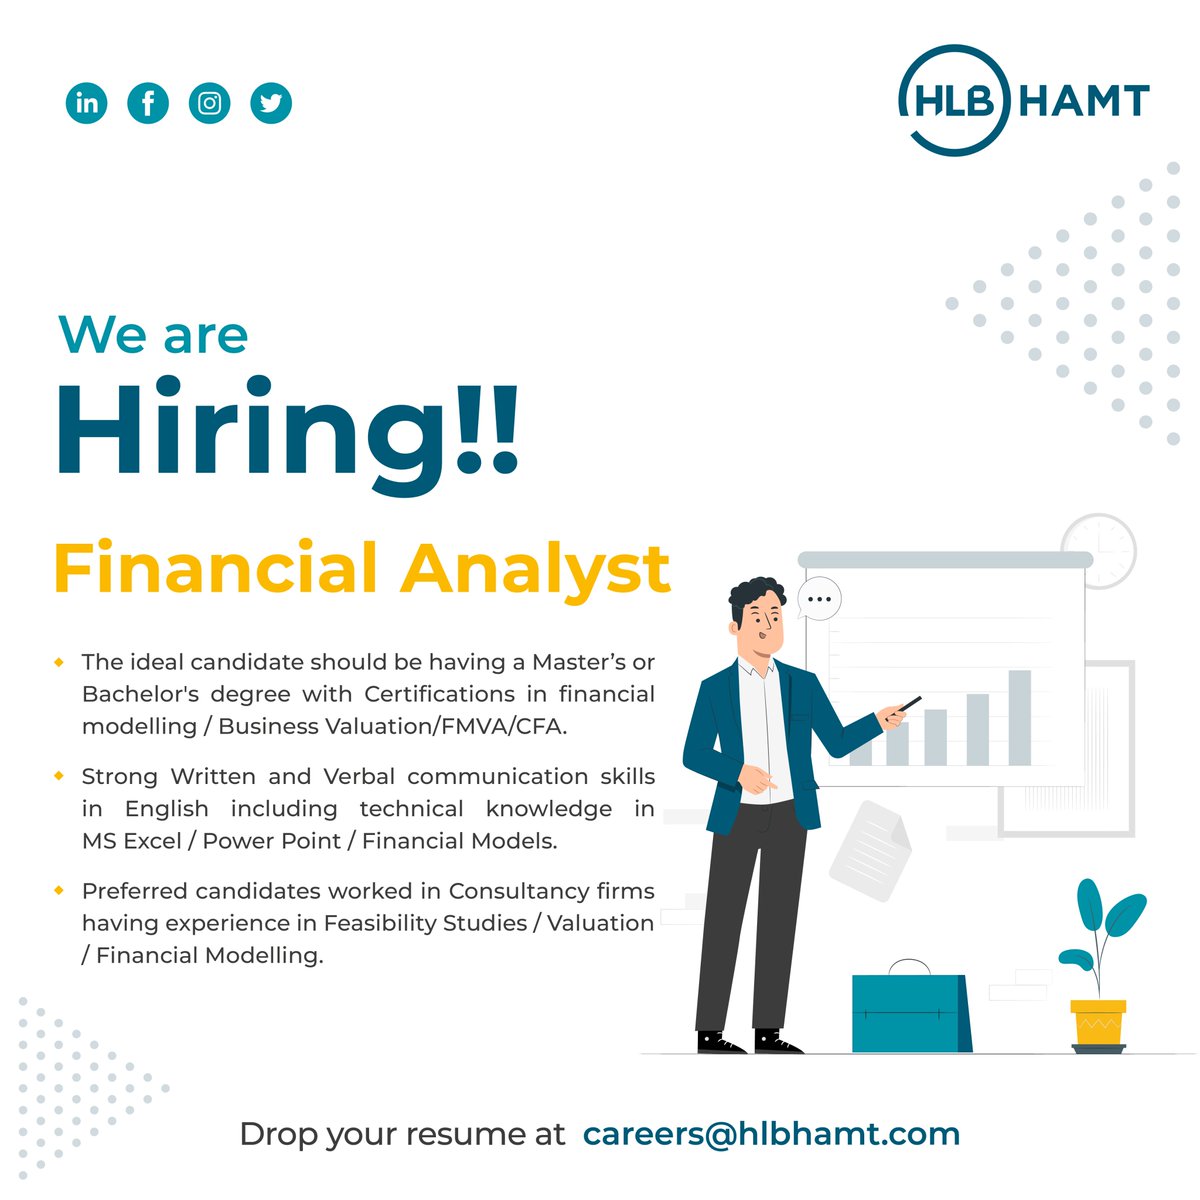 We are seeking an enthusiastic financial analyst to join our growing team in Dubai.

Eligible candidates can share their resumes to careers@hlbhamt.com

#jobhiring #businessanalystjobs #uaeanalyst #analystjobs  #iaservices  #jobopportunity #uaecareers #audit  #financialanalyst